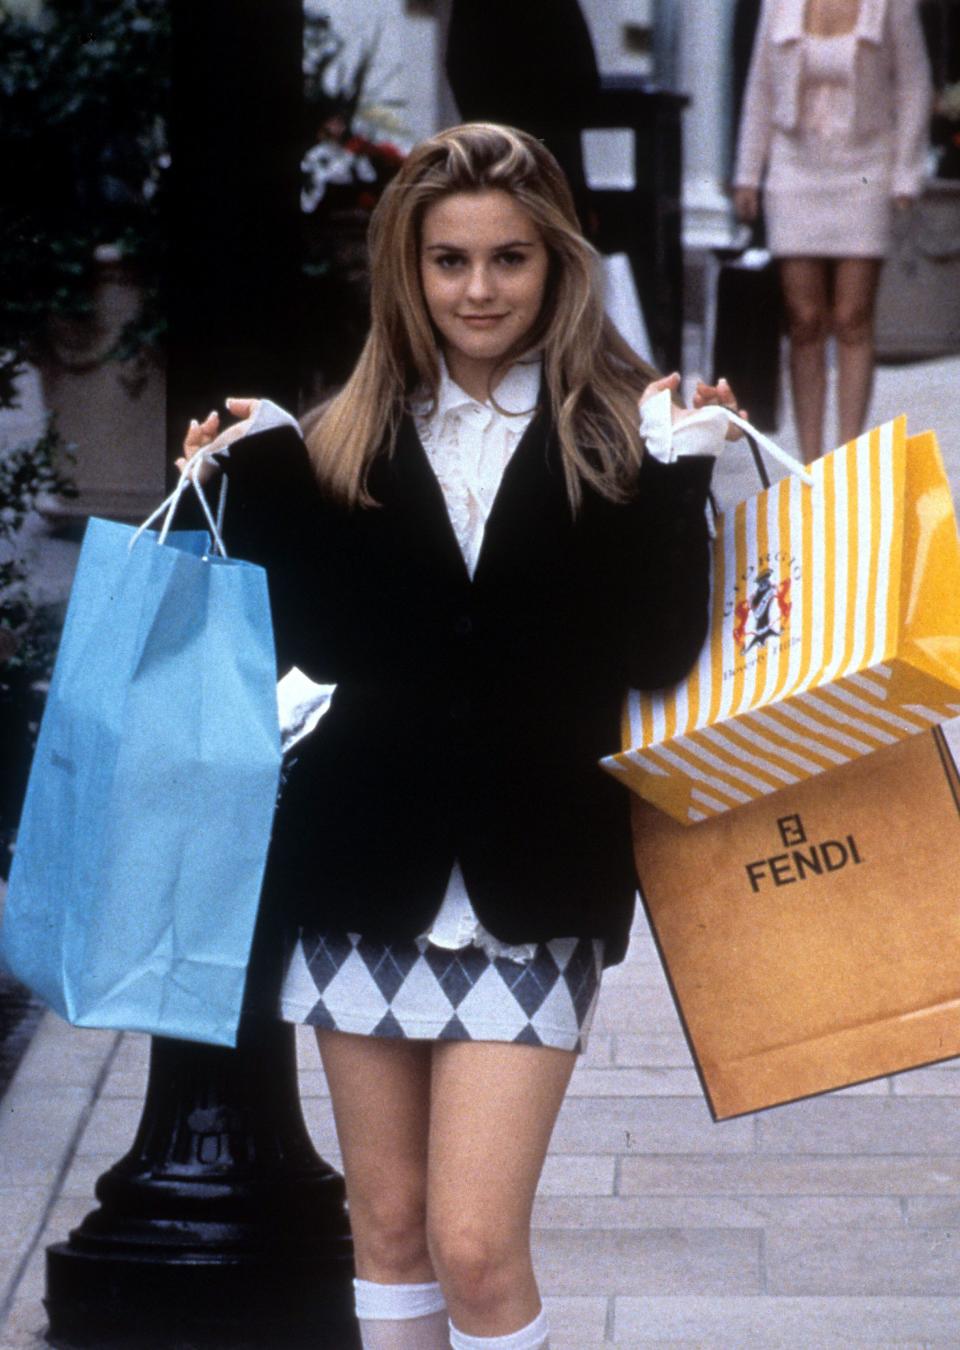 Alicia Silverstone in "Clueless."&nbsp; (Photo: Archive Photos via Getty Images)